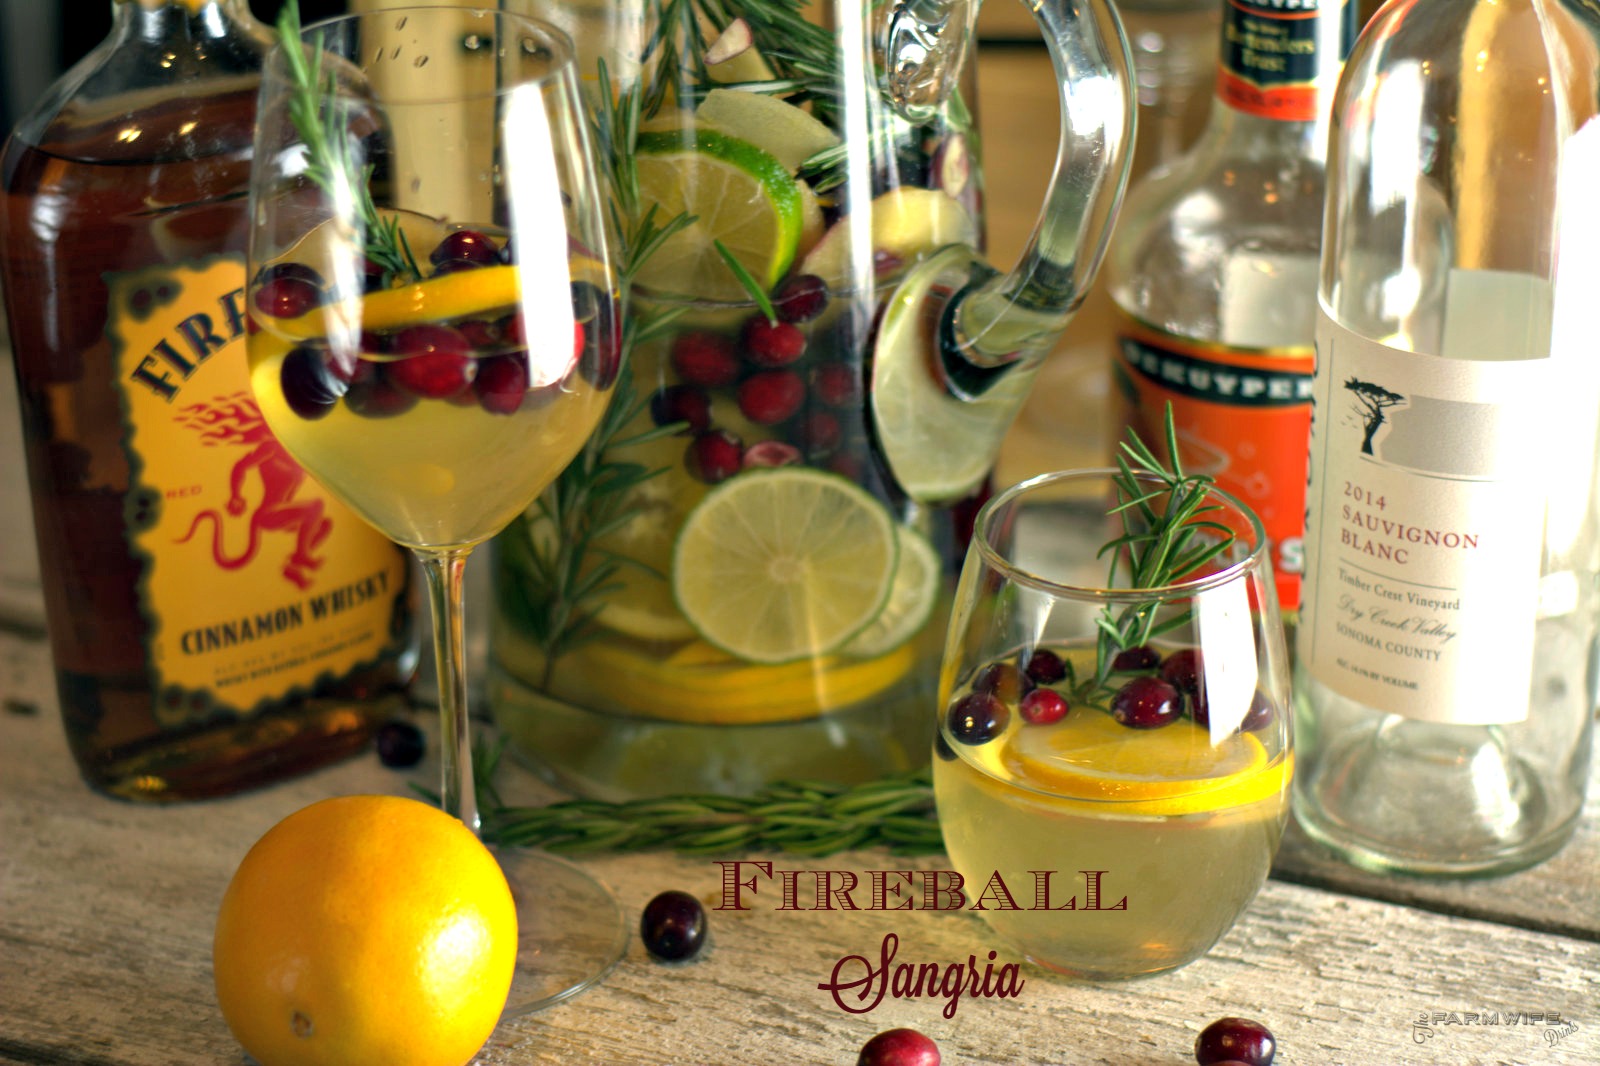 Fireball Sangria recipe is a crisp white wine sangria with a strong cinnamon flavor. Subtle hits of orange, cranberry, and apple make this the perfect Christmas Sangria.